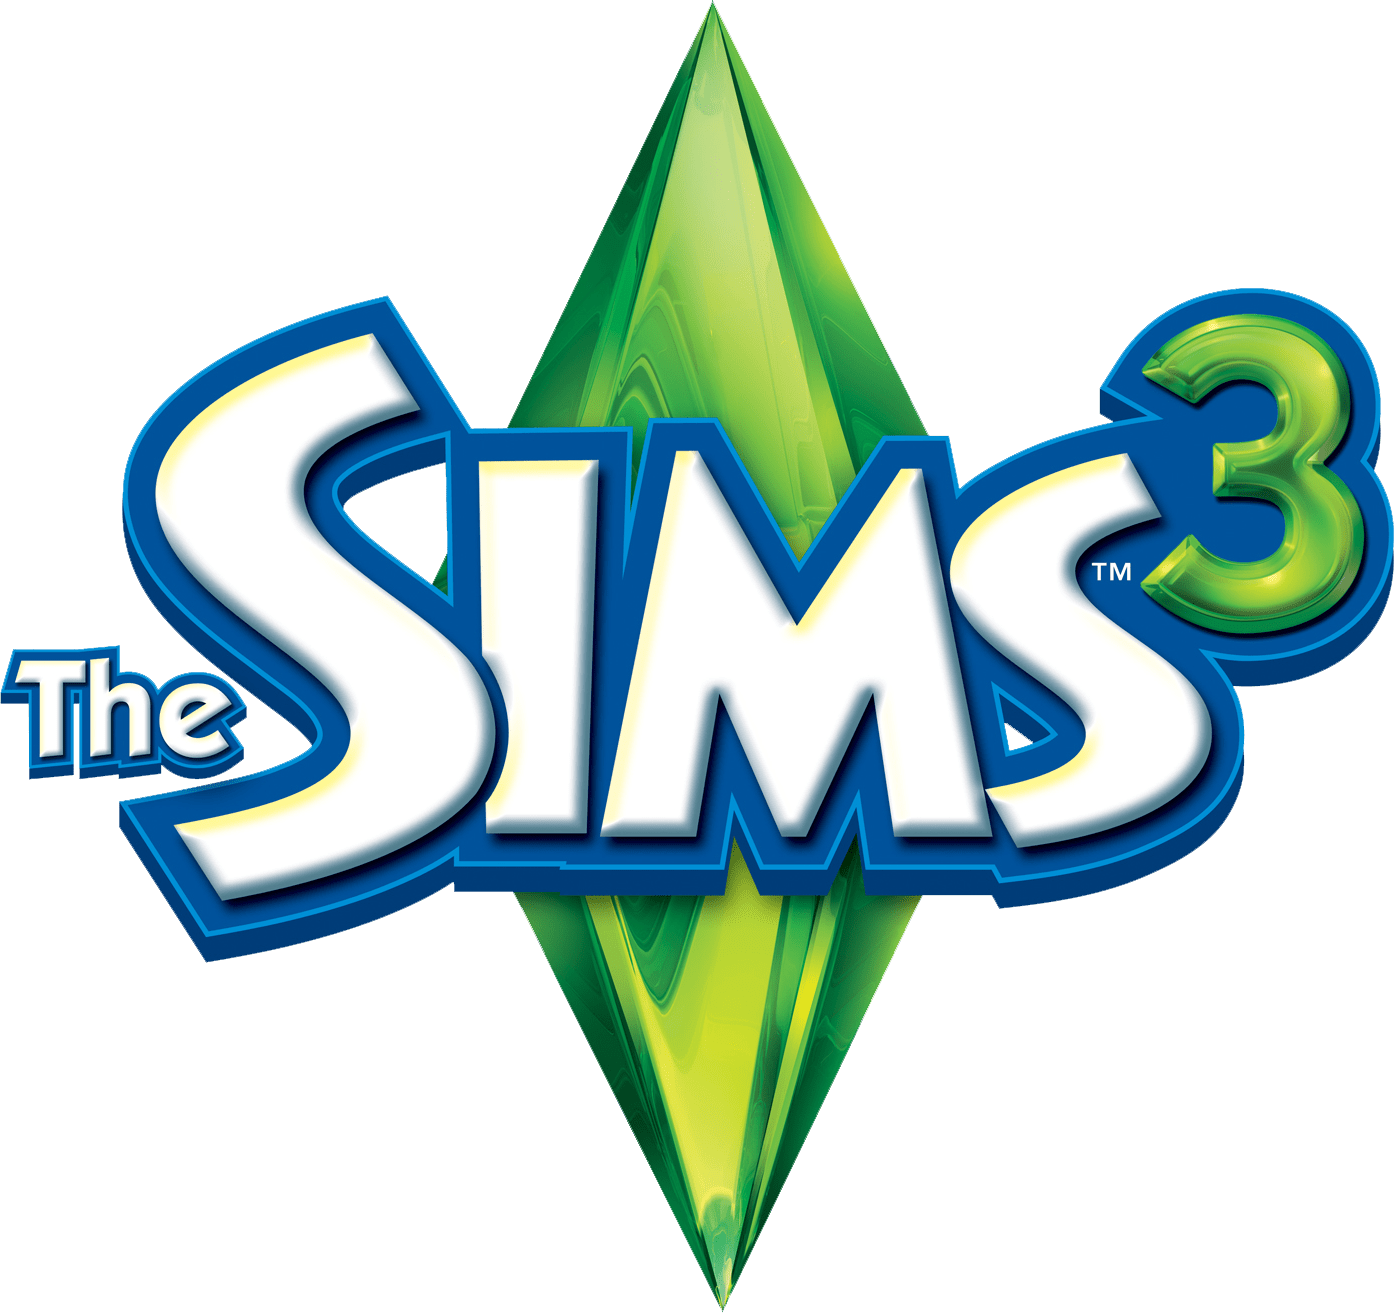 The Sims Logo PNG HD Images